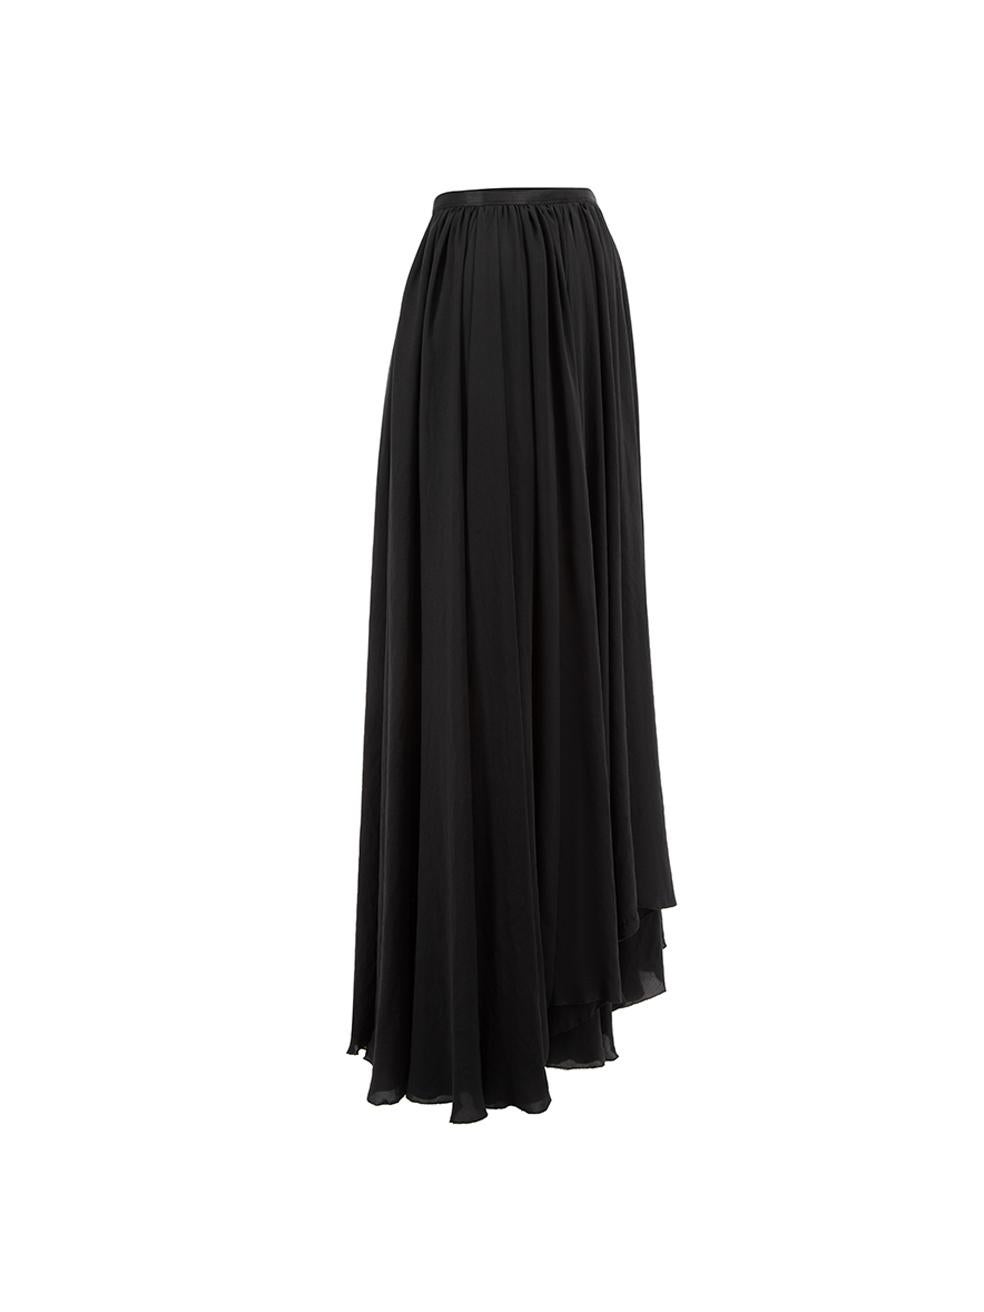 CONDITION is Very good. Minimal wear to skirt is evident. Minimal wear to the hemline and there is loose thread at the waistband where the hook fastening attaches to on this used Lanvin designer resale item.   Details  Black Polyester Full skirt